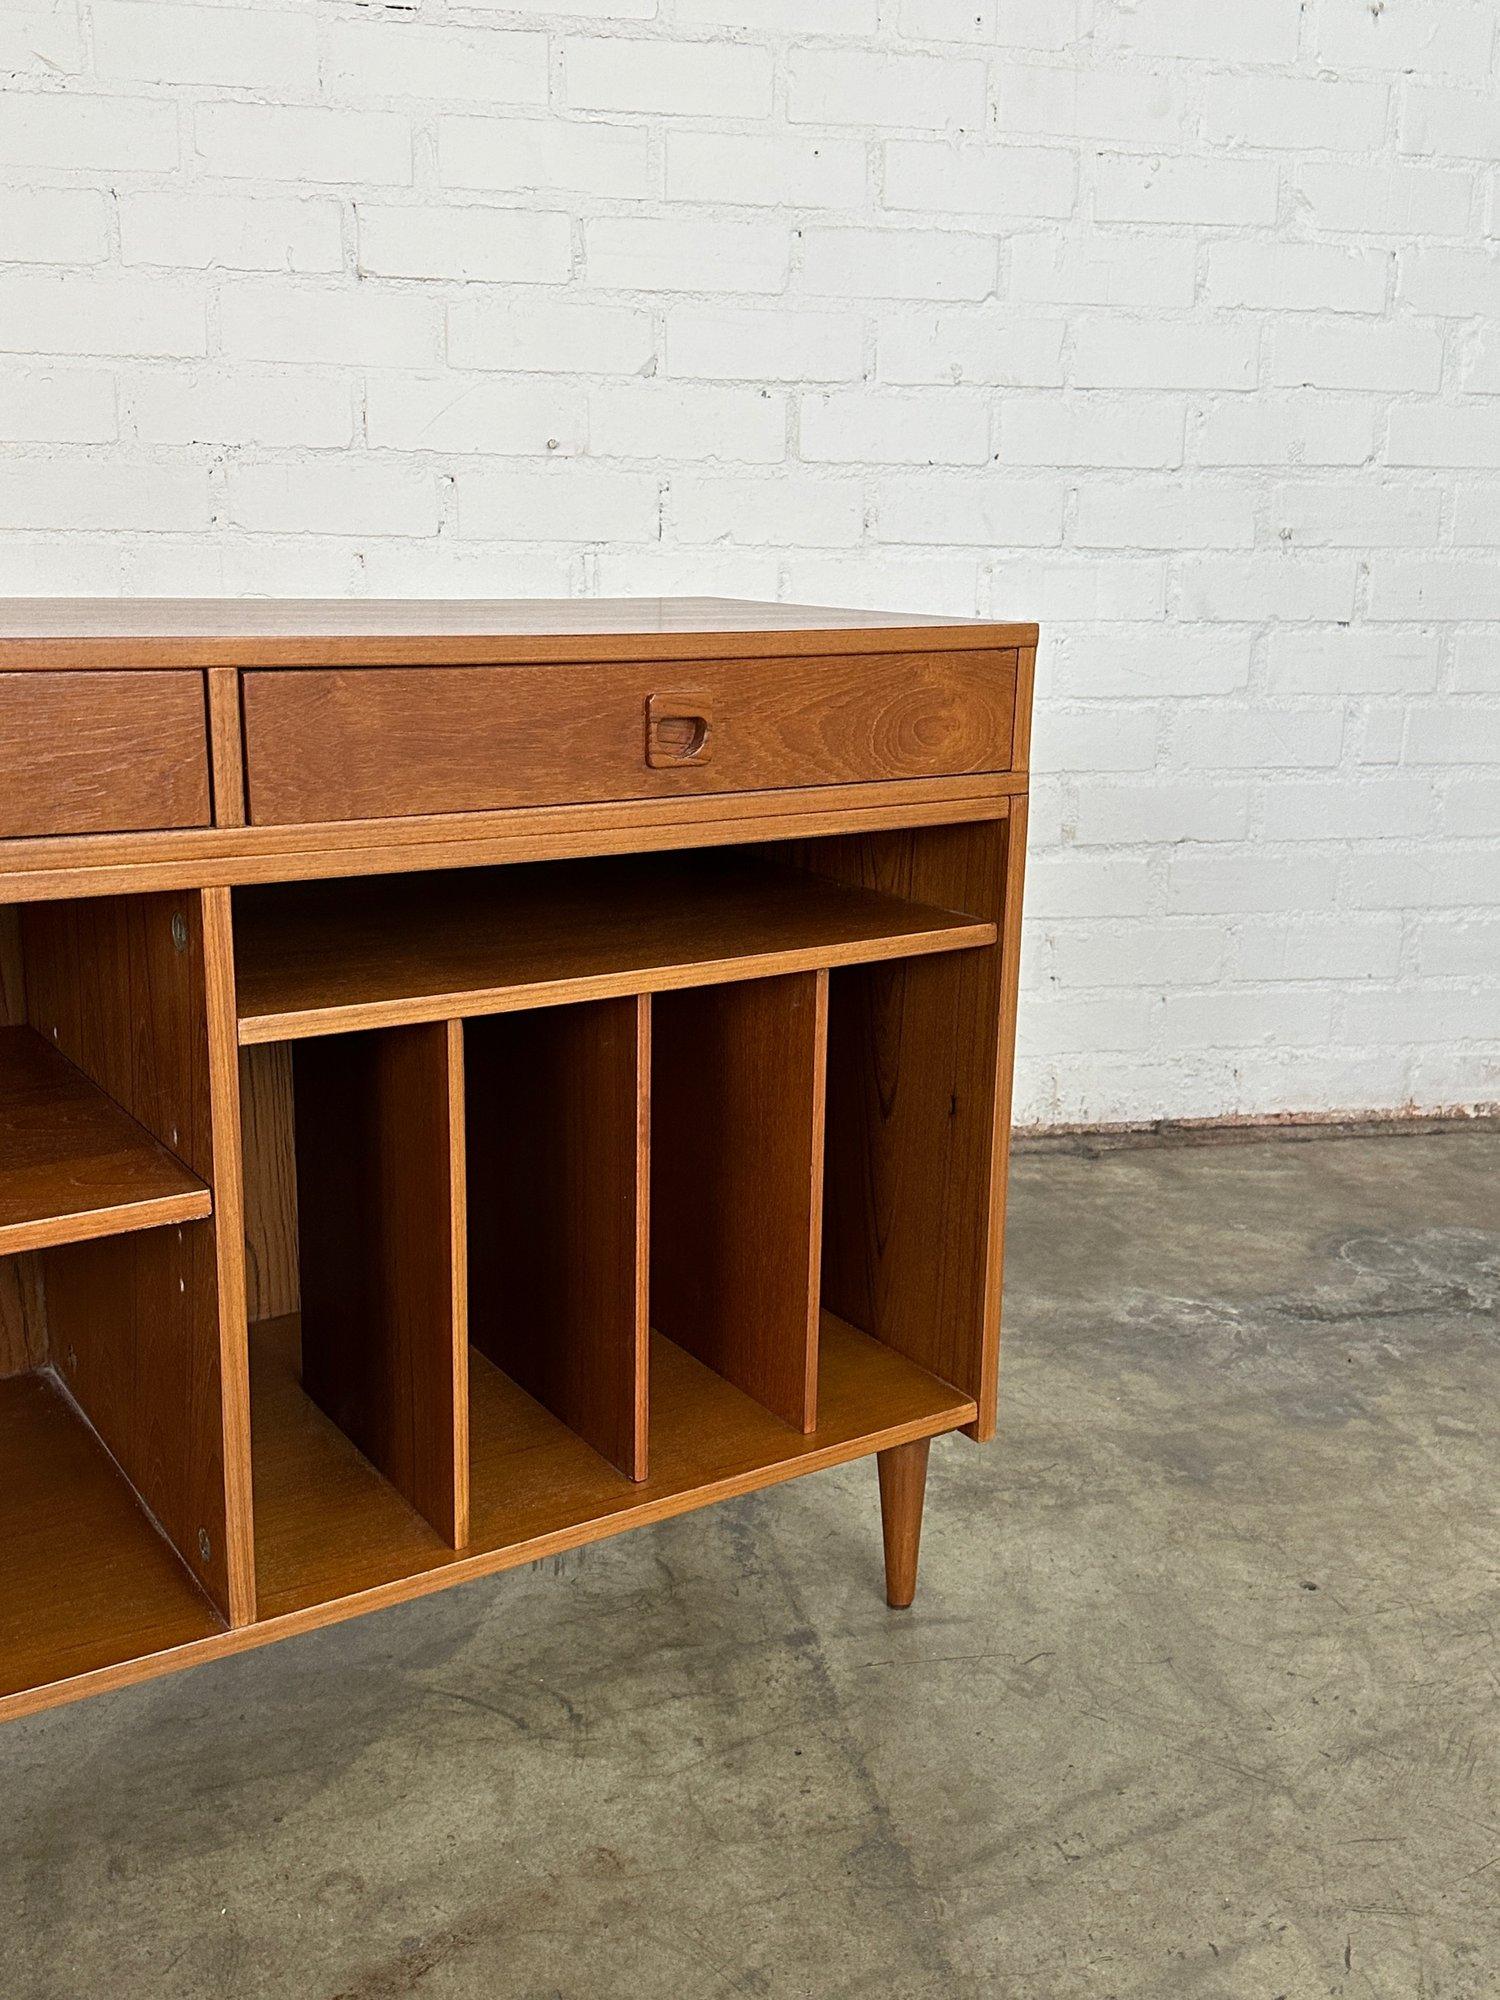 W47.5 D18 H31.5

Fully restored teak credenza in great conditon. Item is strcutrally sound and features removable shelving and record dividers. Item sits on solid wooden tapered legs and has features sculpted handles. 